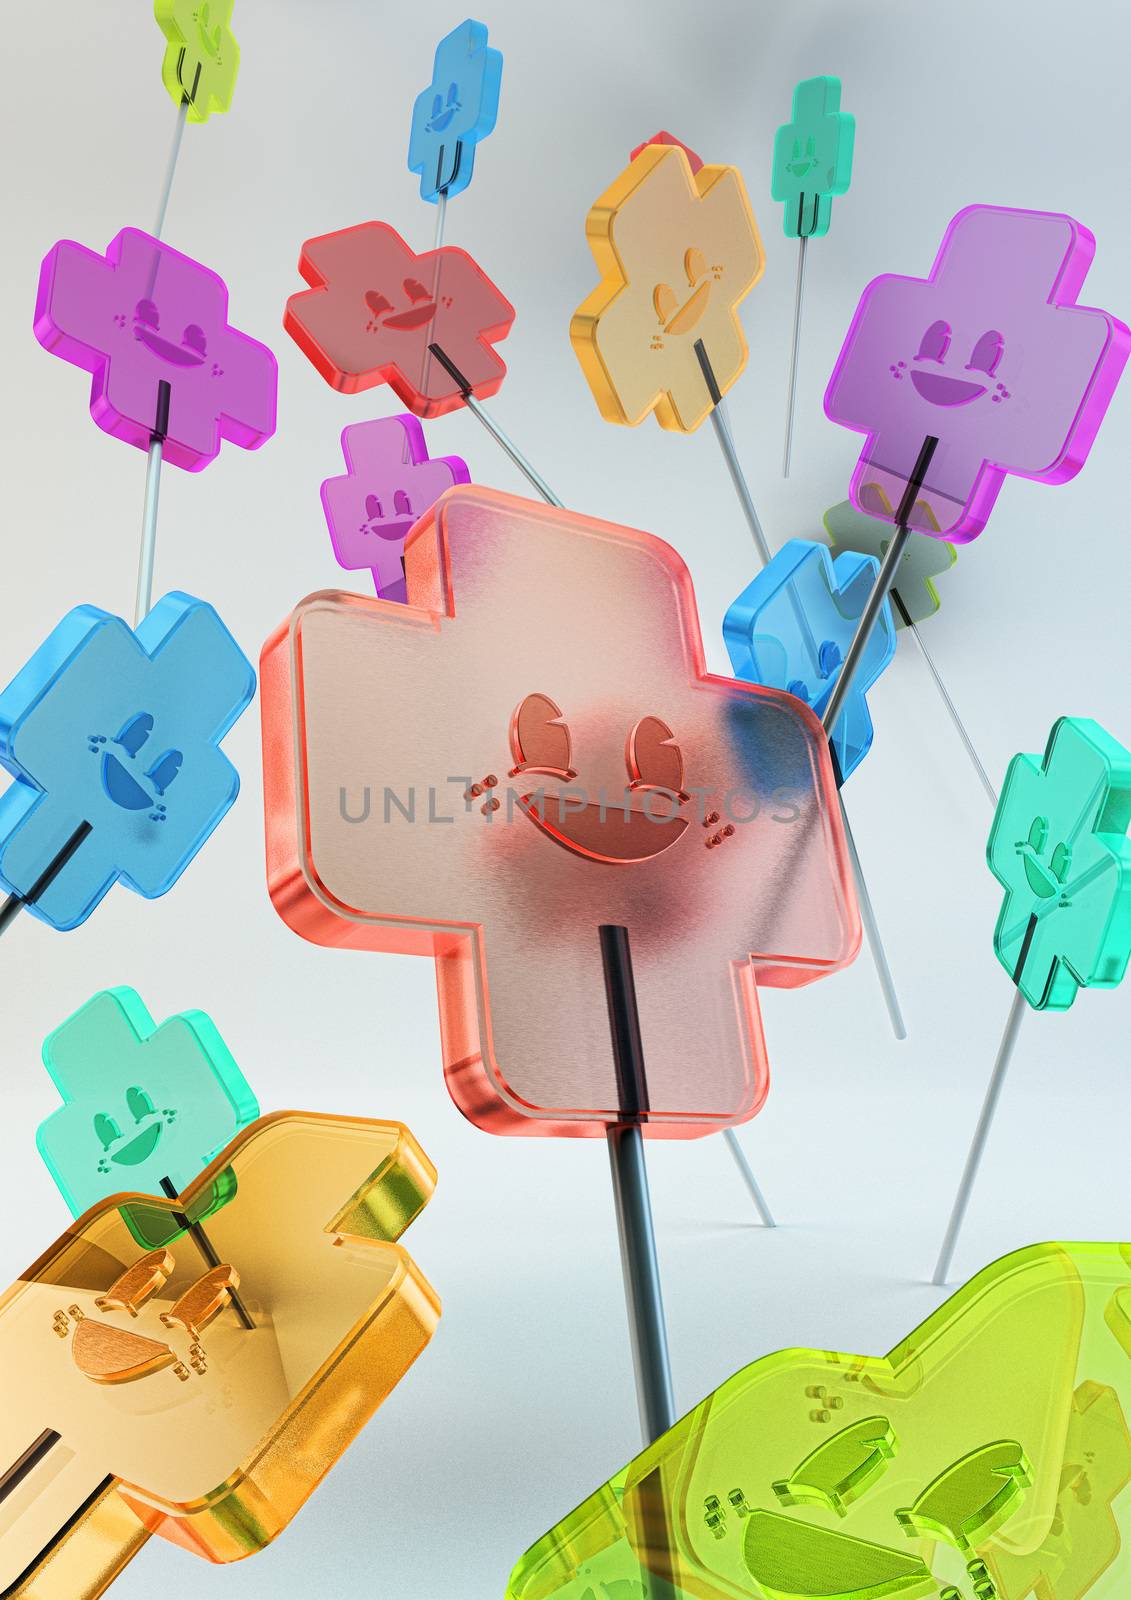 translucent multicolored sweet candies with emoticons on sticks. colorful candy on white background isolated